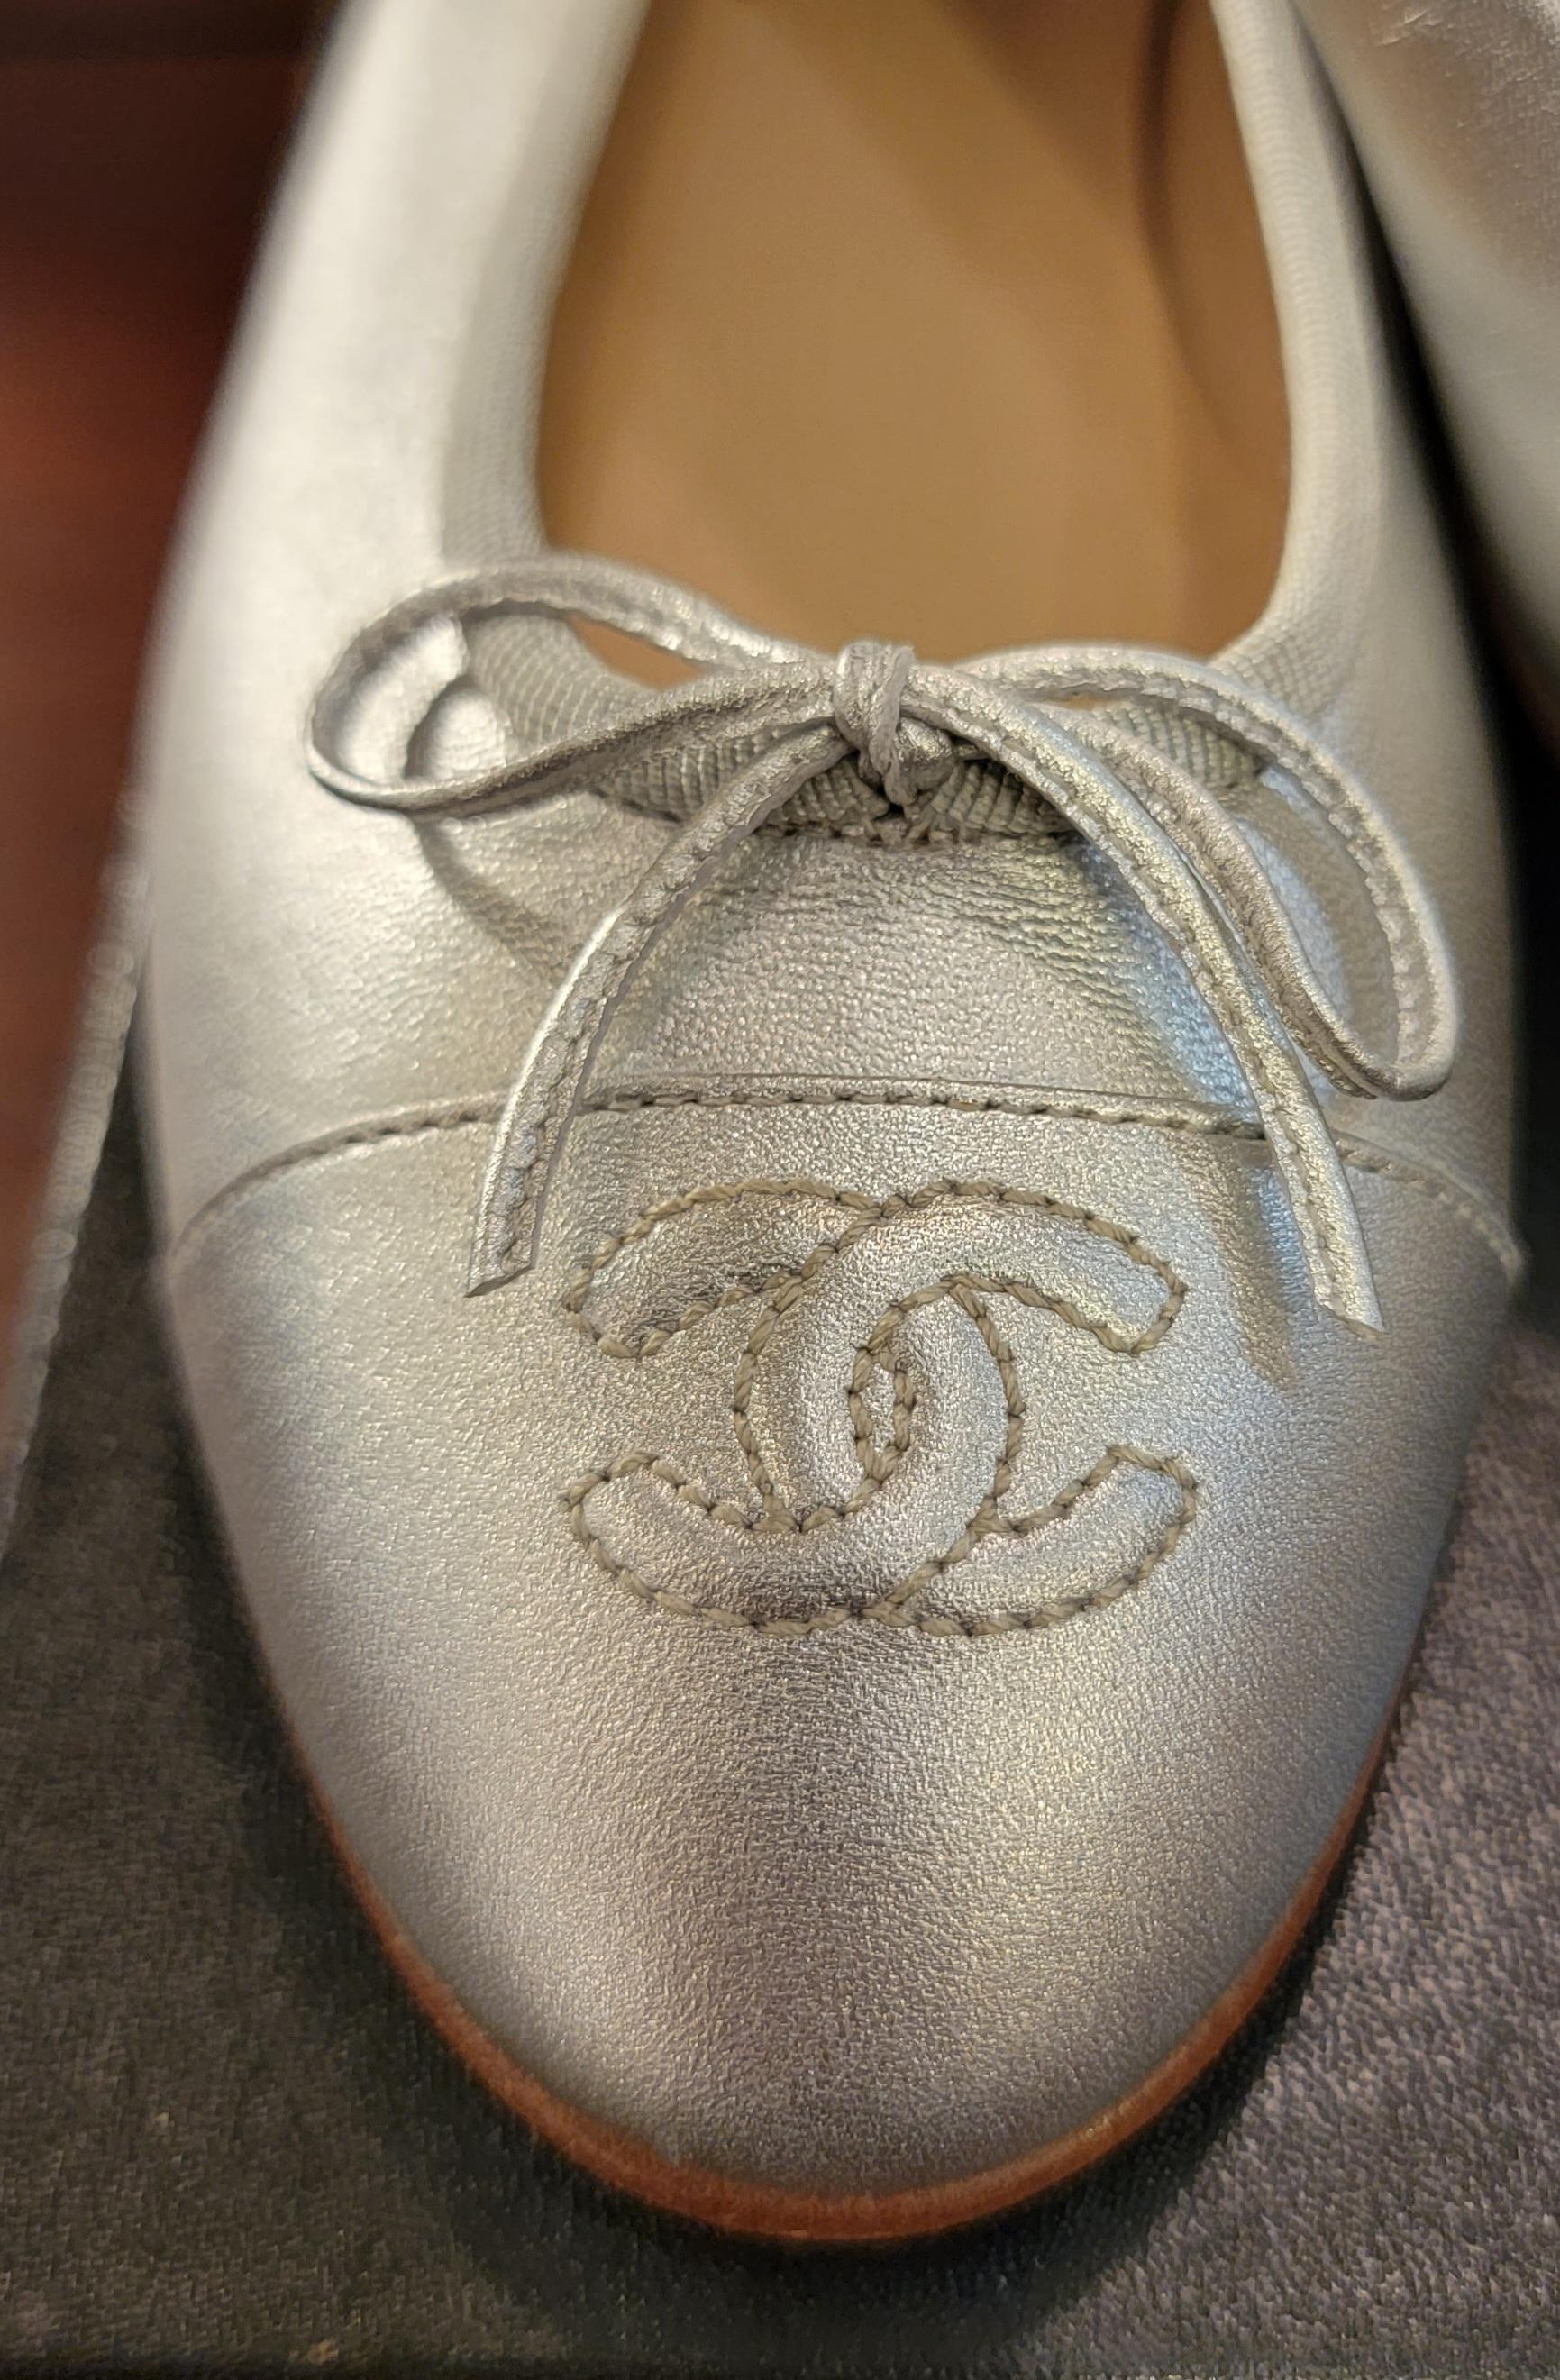 Rare Brand New Chanel Ballerina Size 39 Metalic Silver Shoes For Sale 3